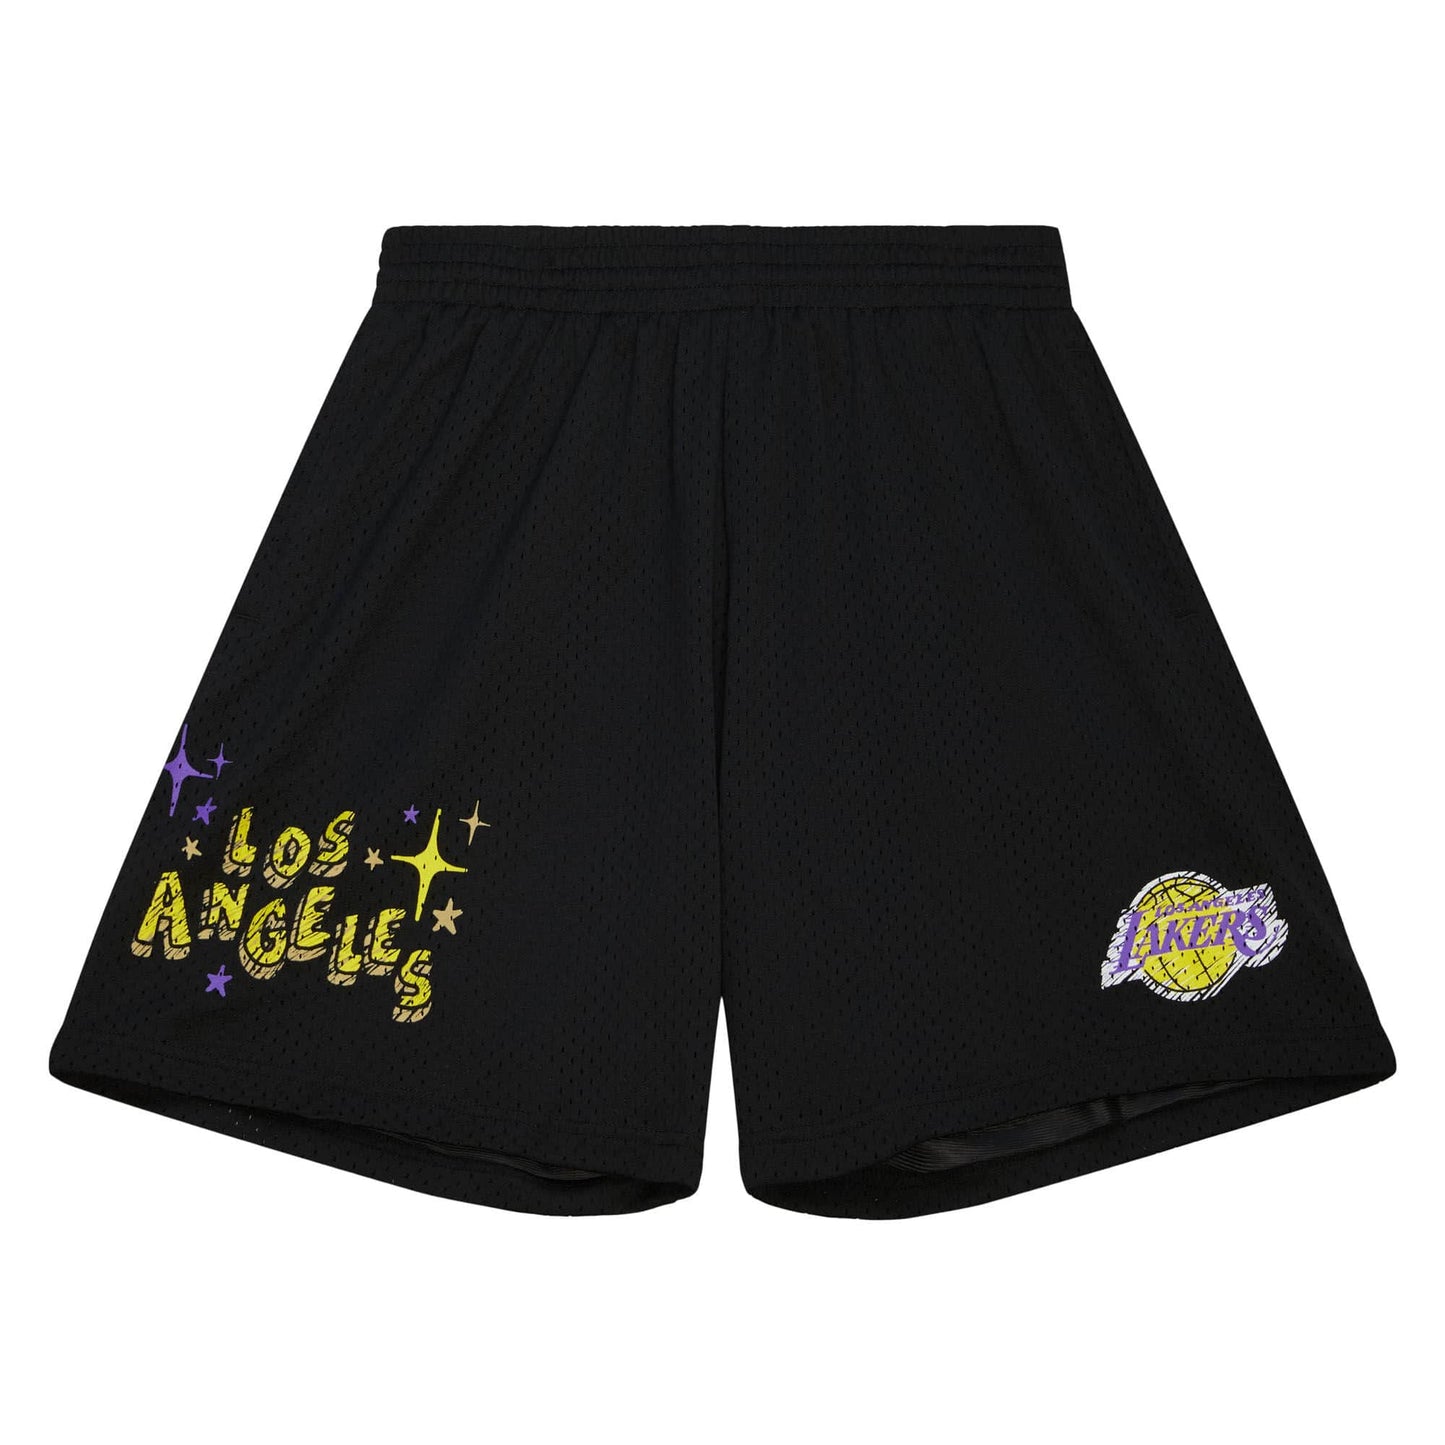 MITCHELL & NESS: LOS ANGELES LAKERS SHORTS